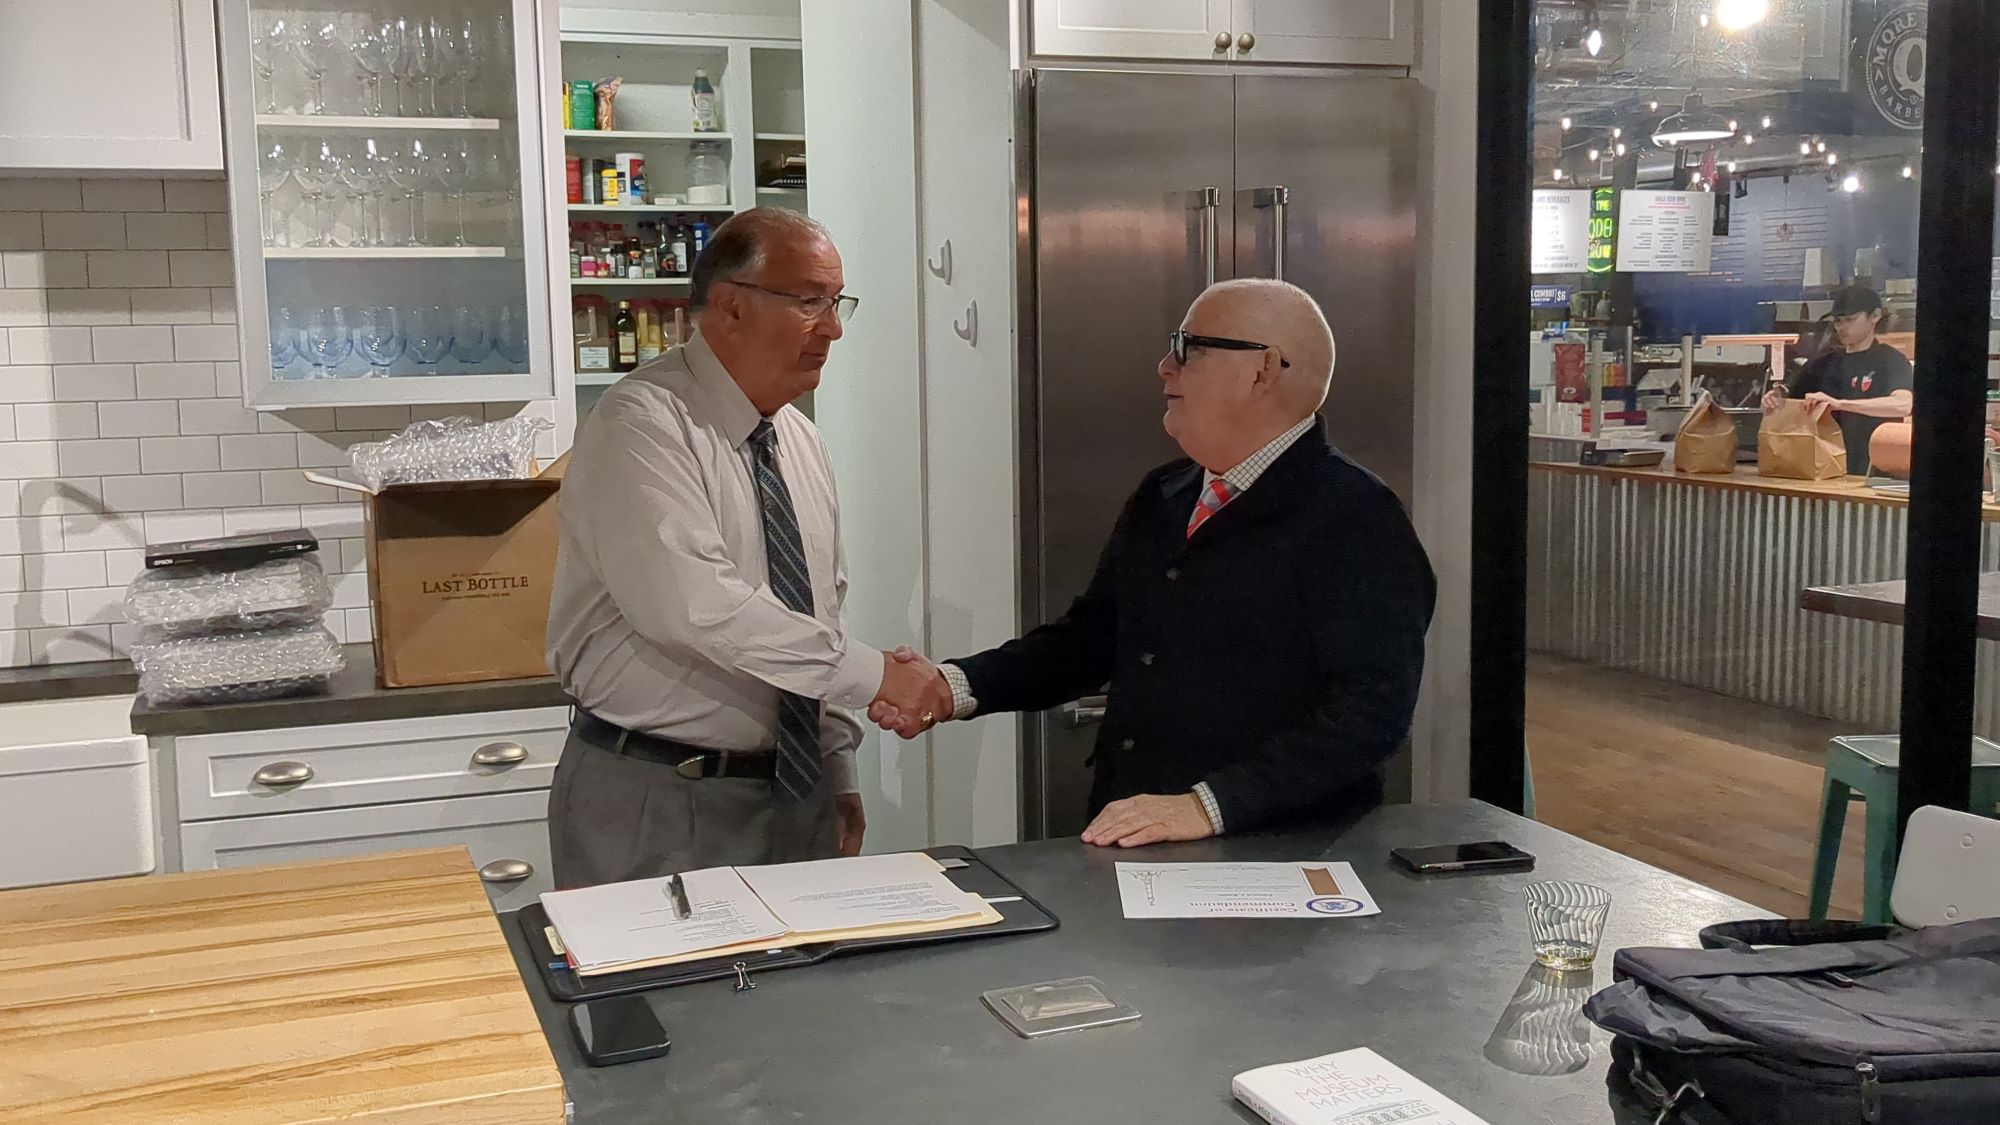 Easton Mayor Sal Panto shakes hands with Ed Kerns in the Easton Public Market's test kitchen.